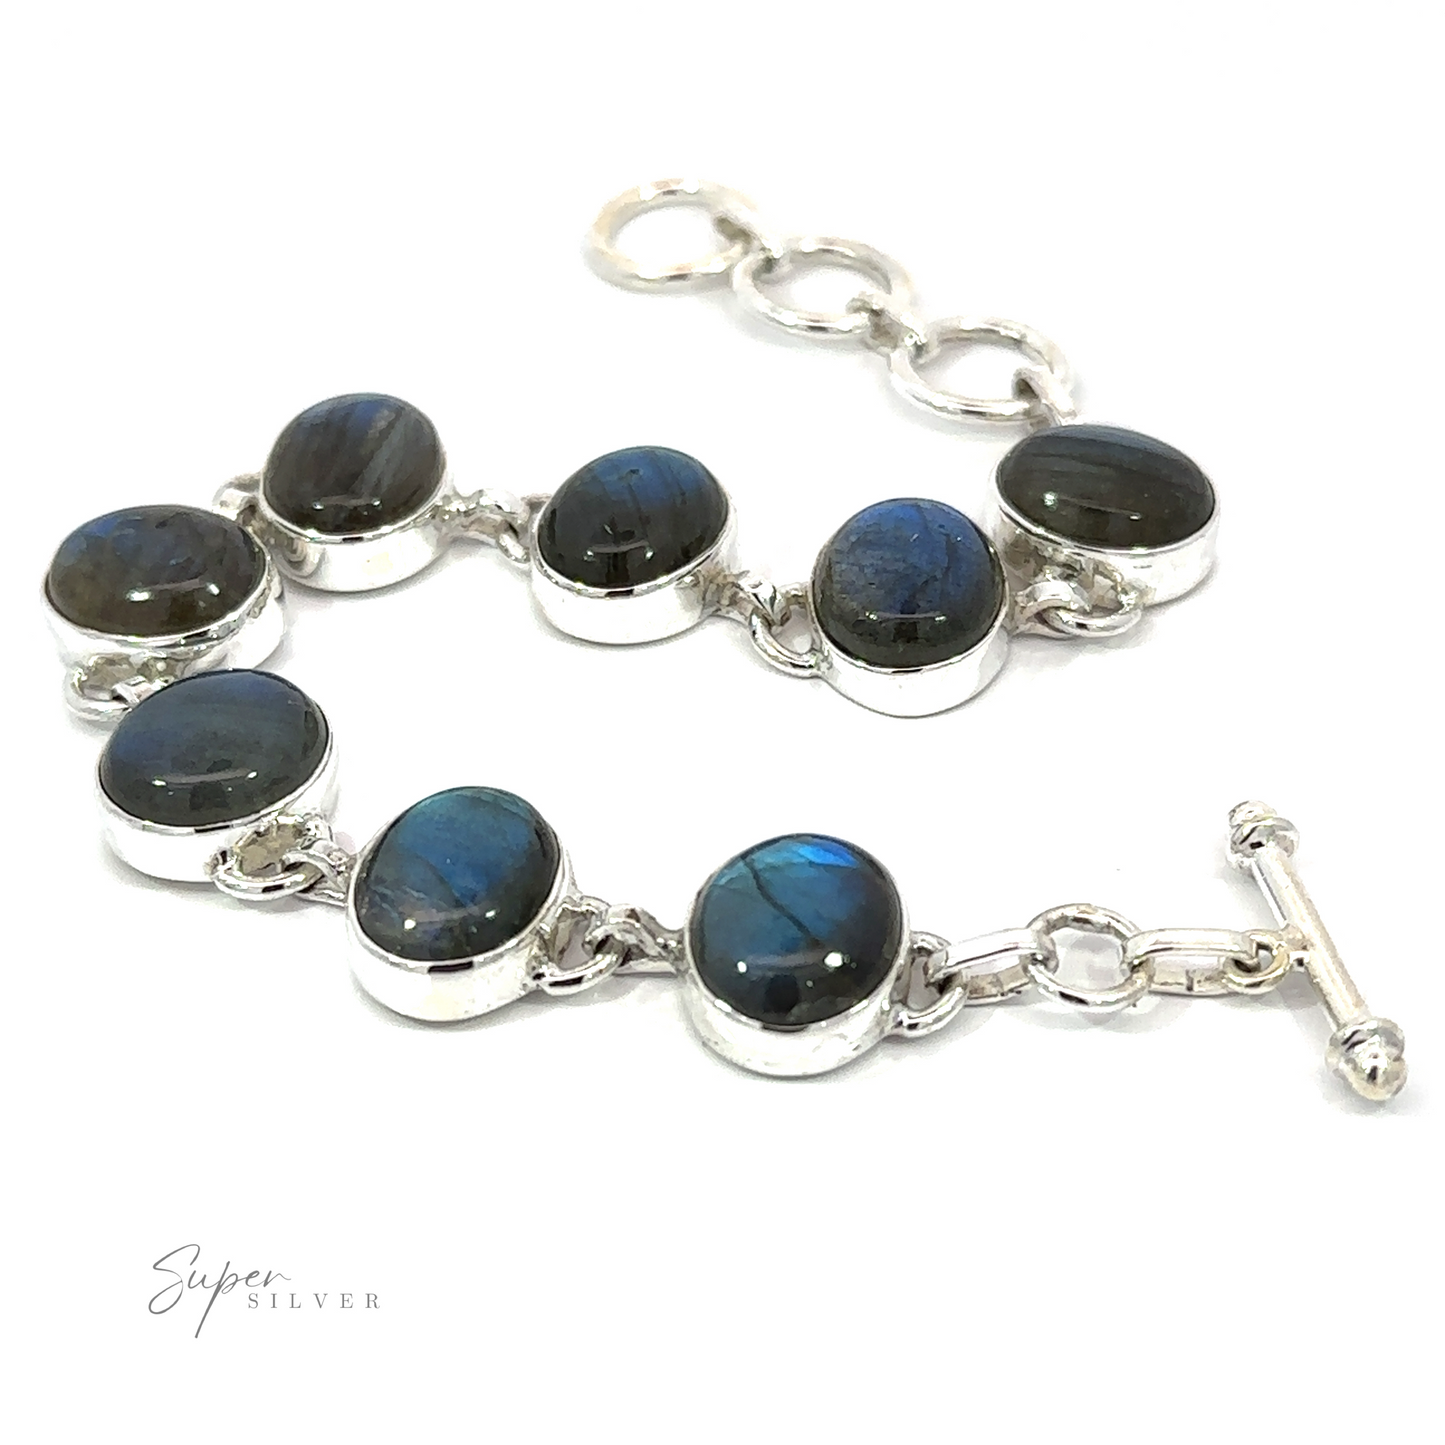 Statement Oval Gemstone Bracelets with oval labradorite stones set in simple bezels, linked together with a toggle clasp on a white background.